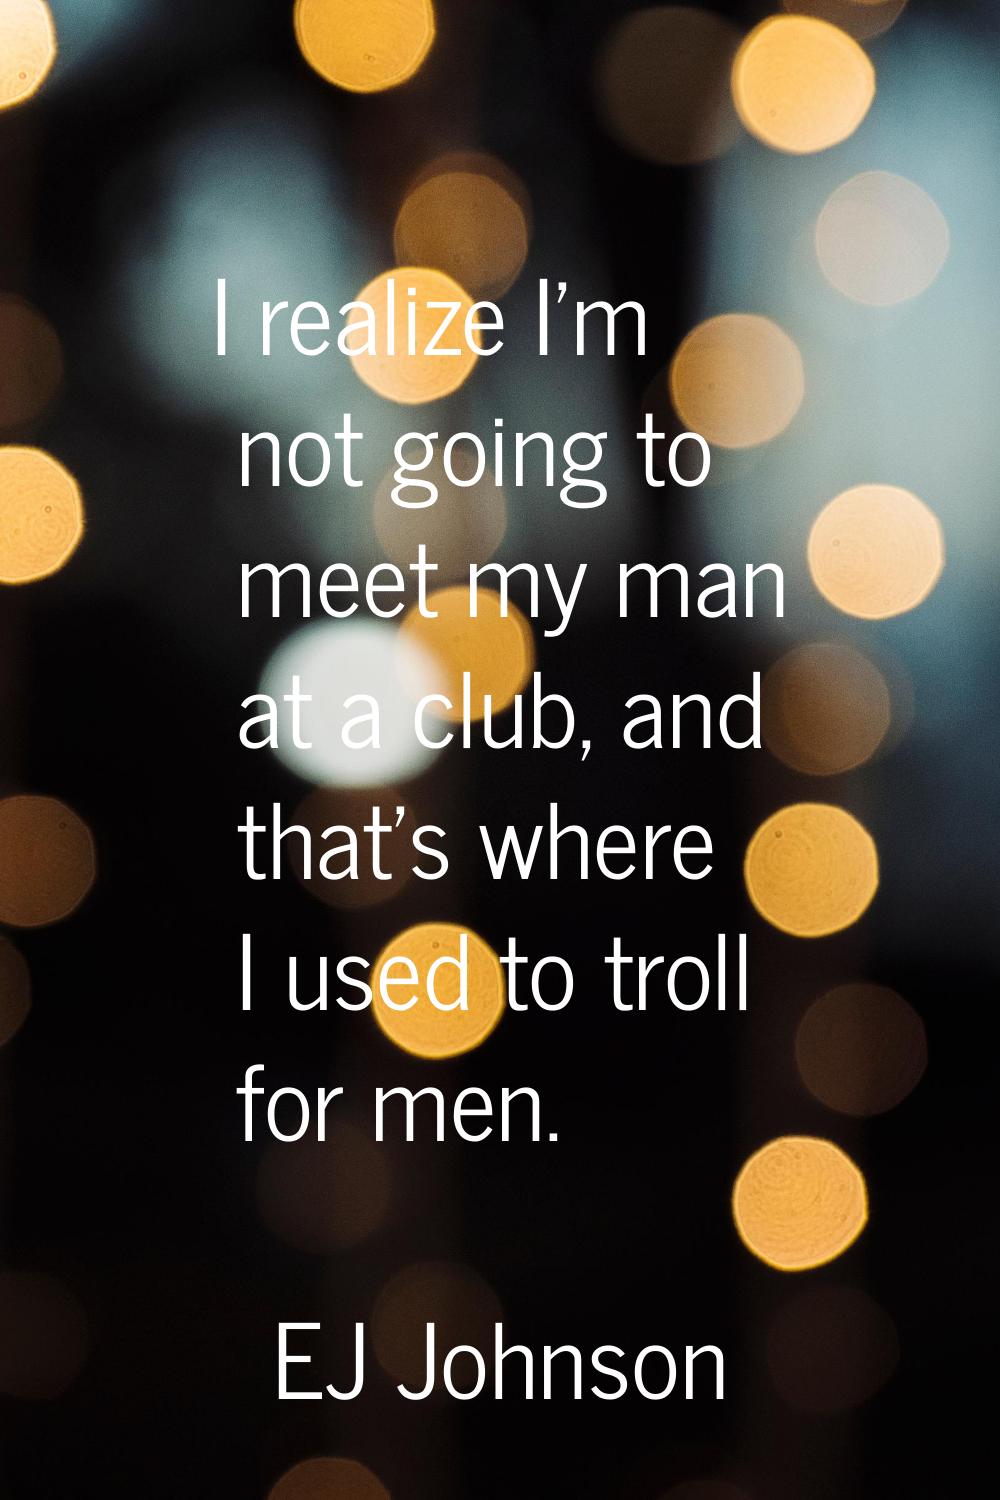 I realize I'm not going to meet my man at a club, and that's where I used to troll for men.